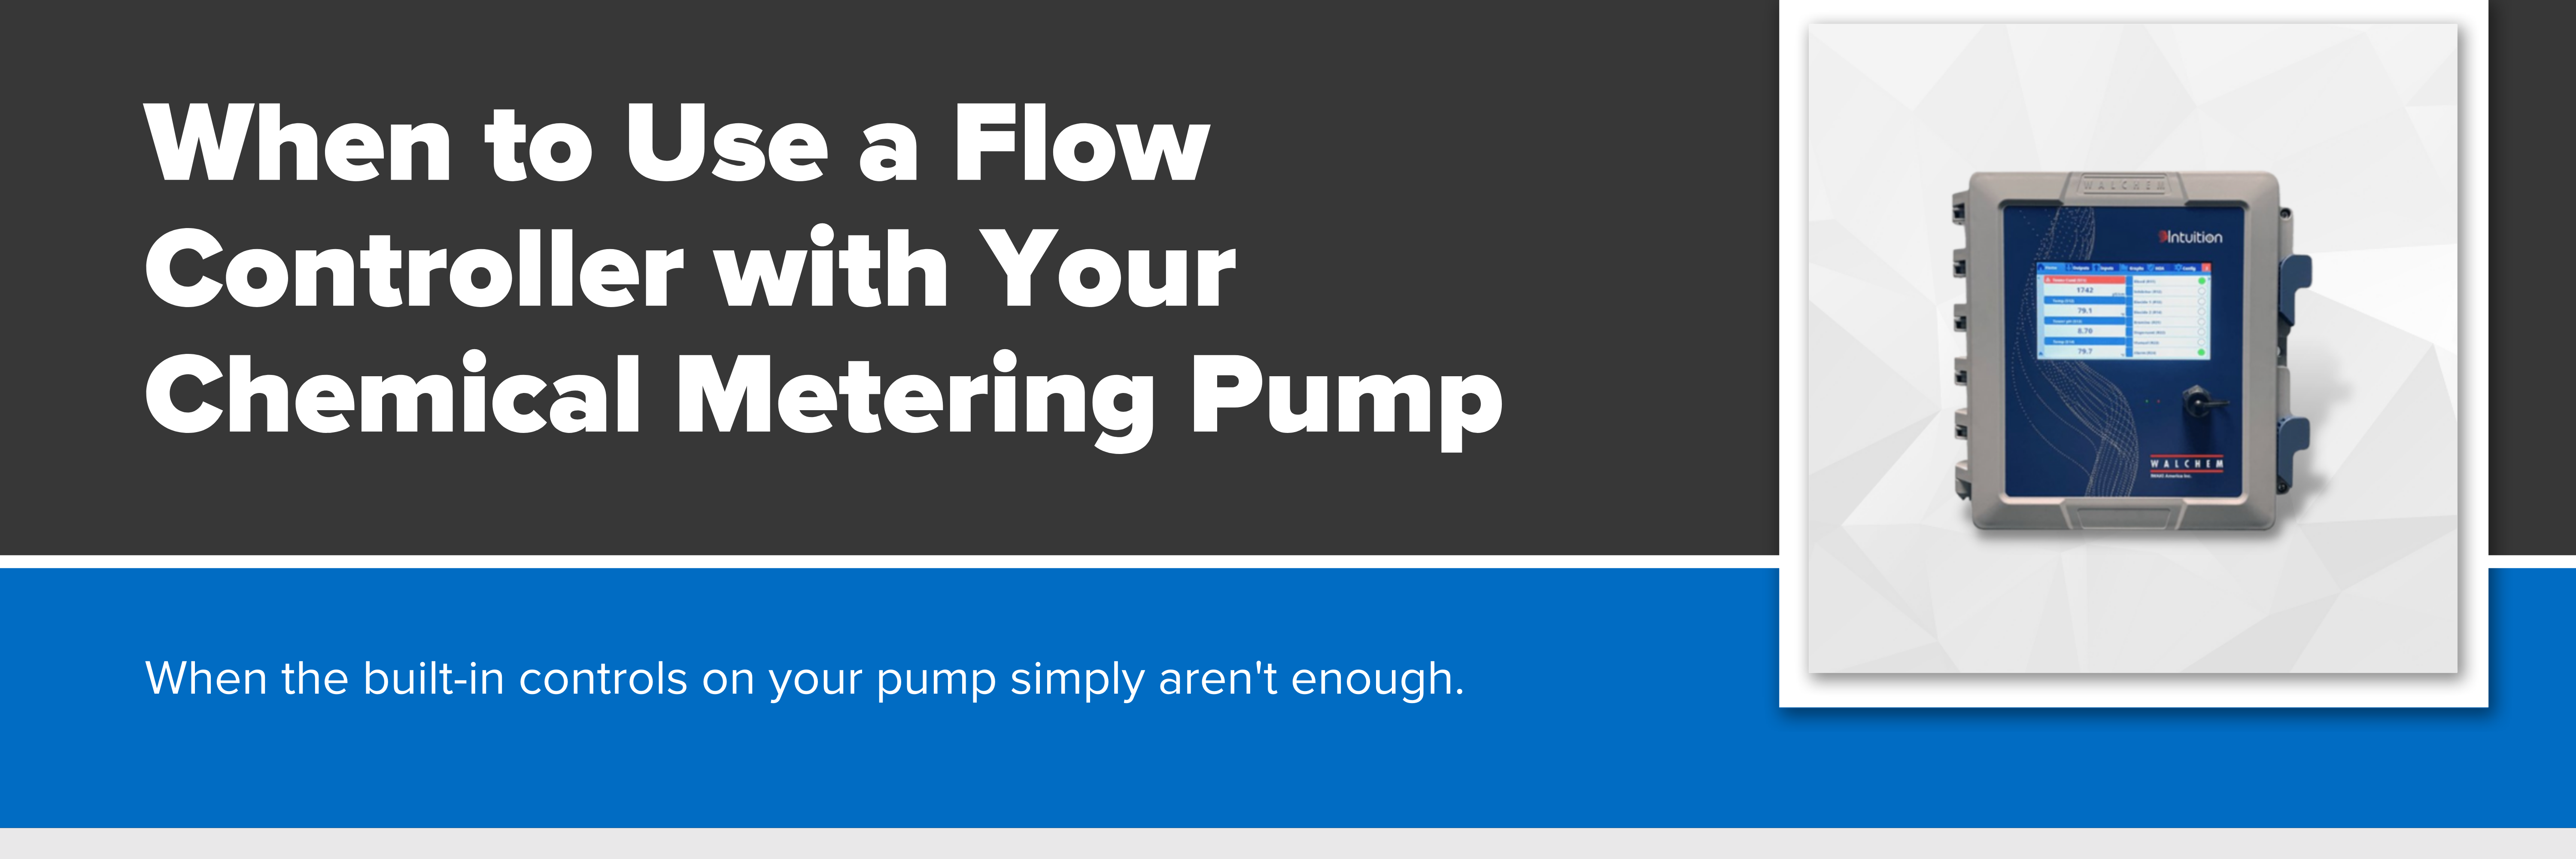 Header image with text "when to use a flow controller with your chemical metering pump."